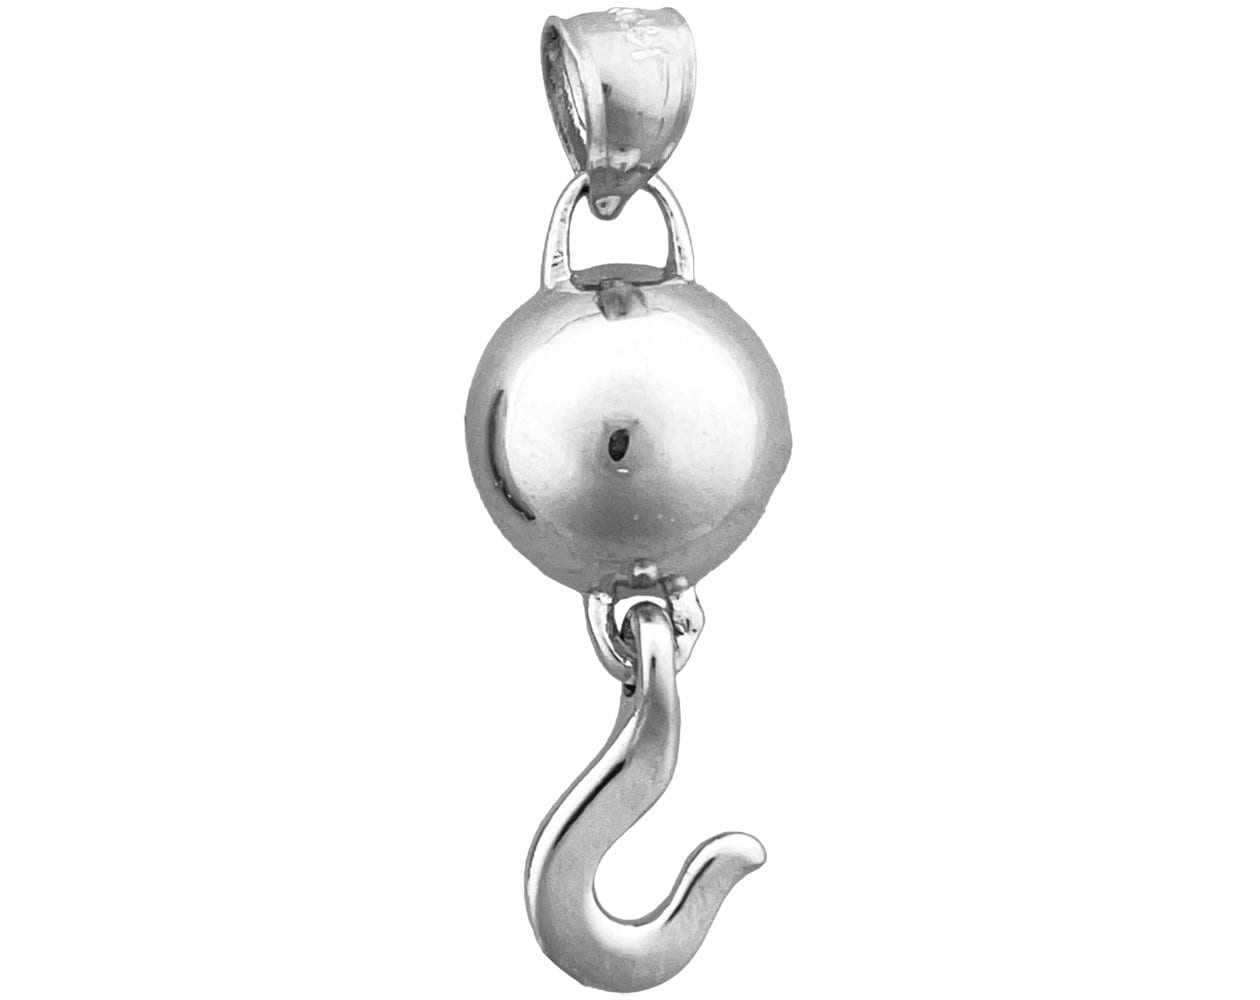 14KT Gold Crane Ball and Hook Pendant c/w by WrenchHeadJewelry